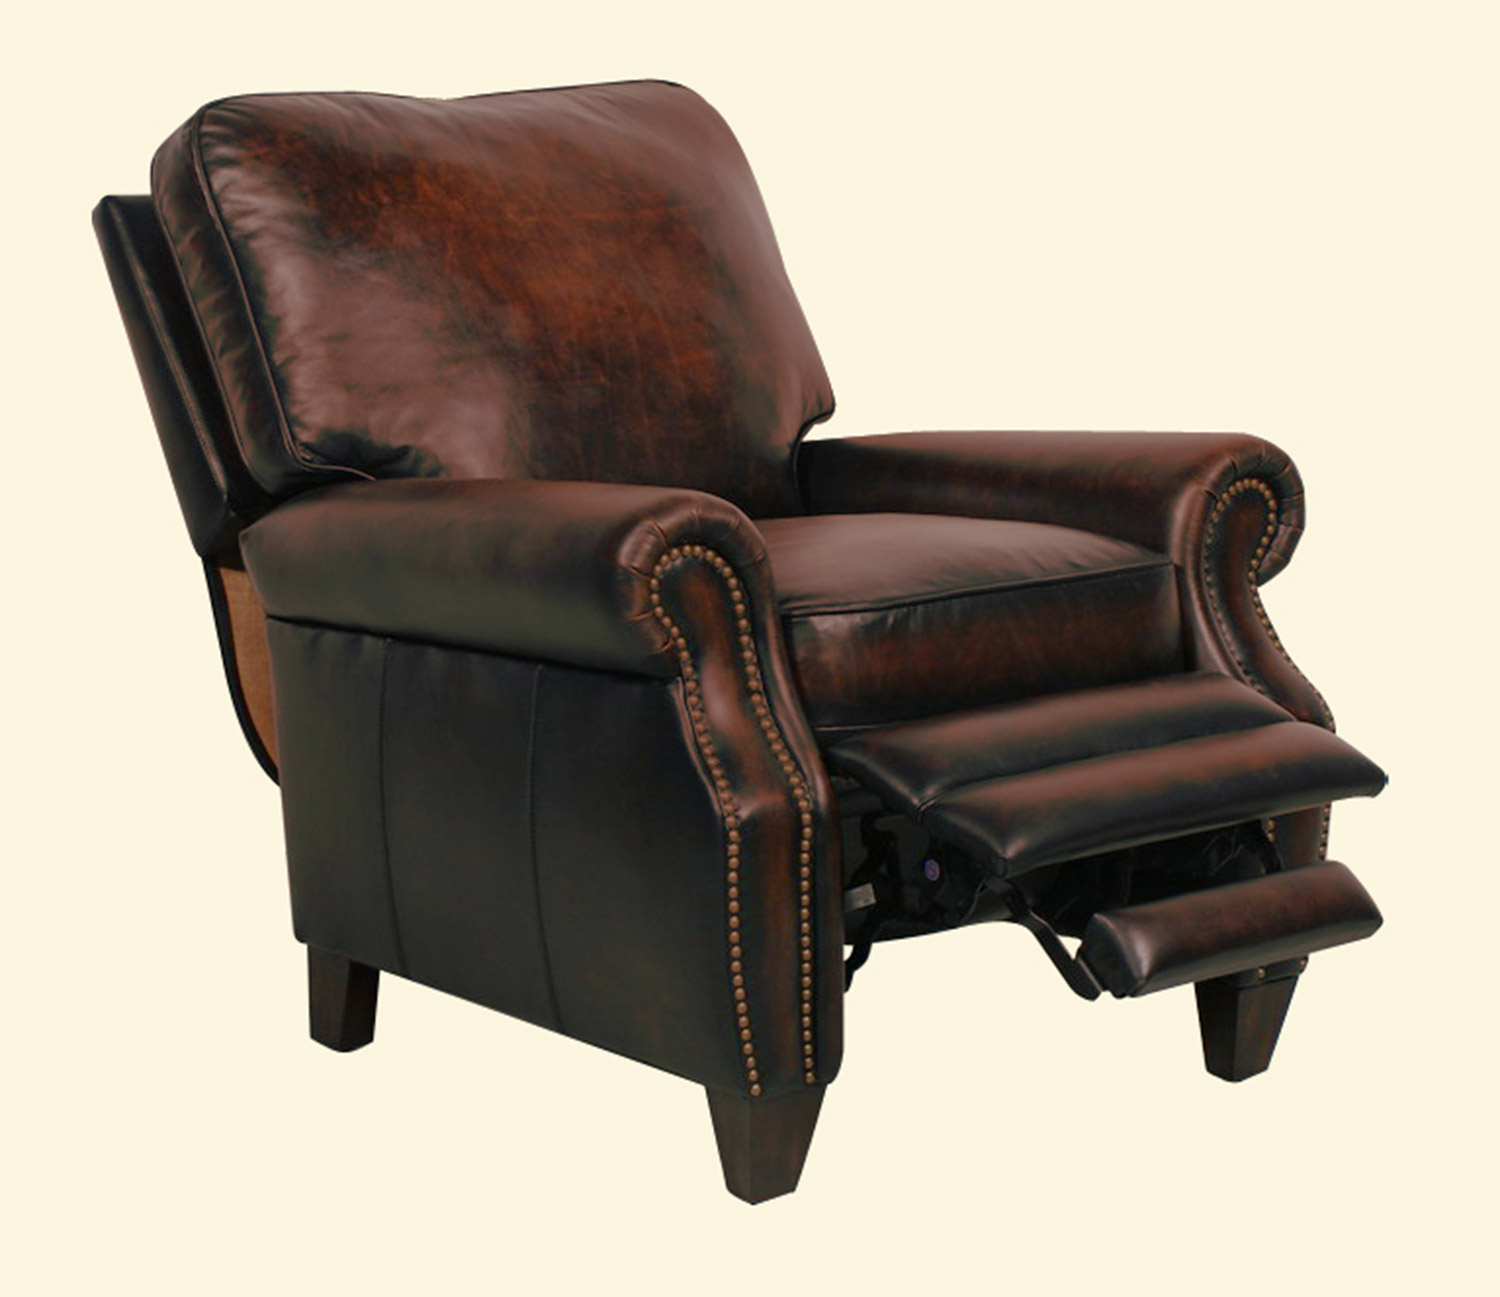 Barcalounger Briarwood ll Vintage Reserve Leather Recliner - Coffee